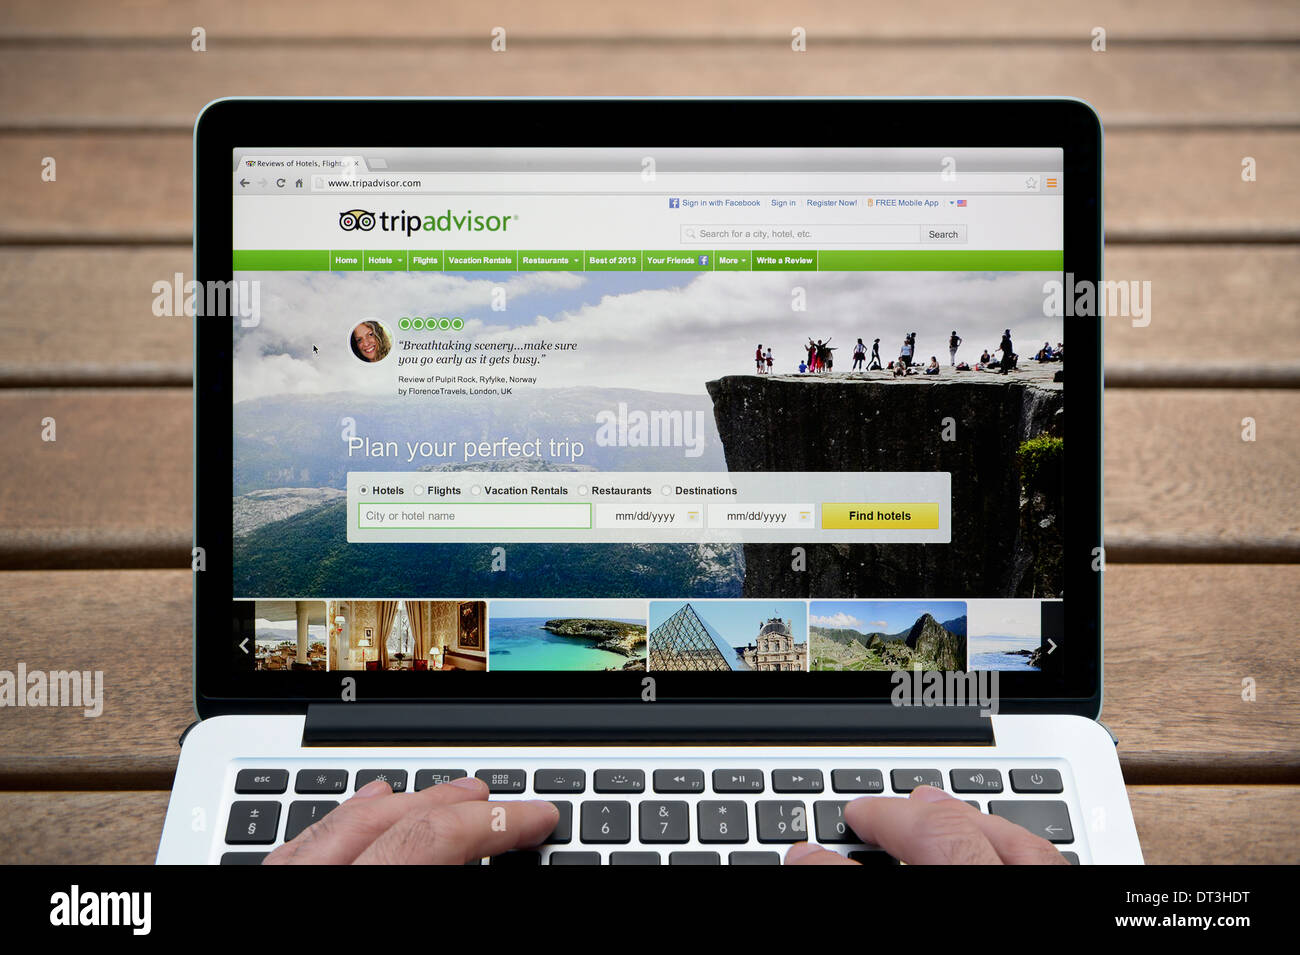 The Trip Advisor website on a MacBook against a wooden bench outdoor background including a man's fingers (Editorial use only). Stock Photo